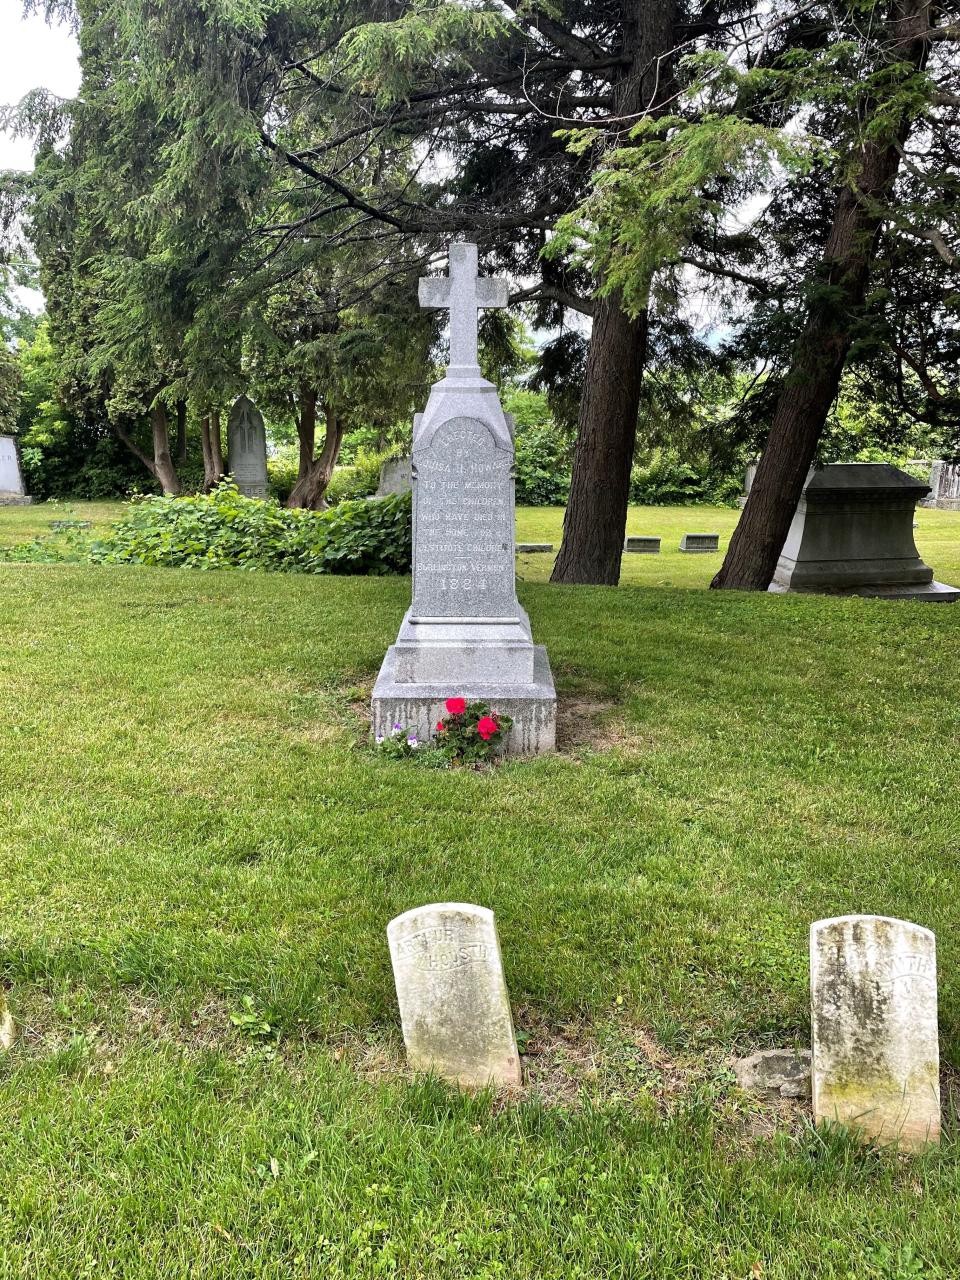 A Lakeview Cemetery stone reads "Erected by Louisa H. Howard To the memory of the children who have died in the Home For Destitute Children - Burlington, Vermont 1884." The stone marks a section of Lakeview Cemetery which includes nearly 50 headstones. The children's headstones from the late-1800s are being restored on Sept. 10, 2022.